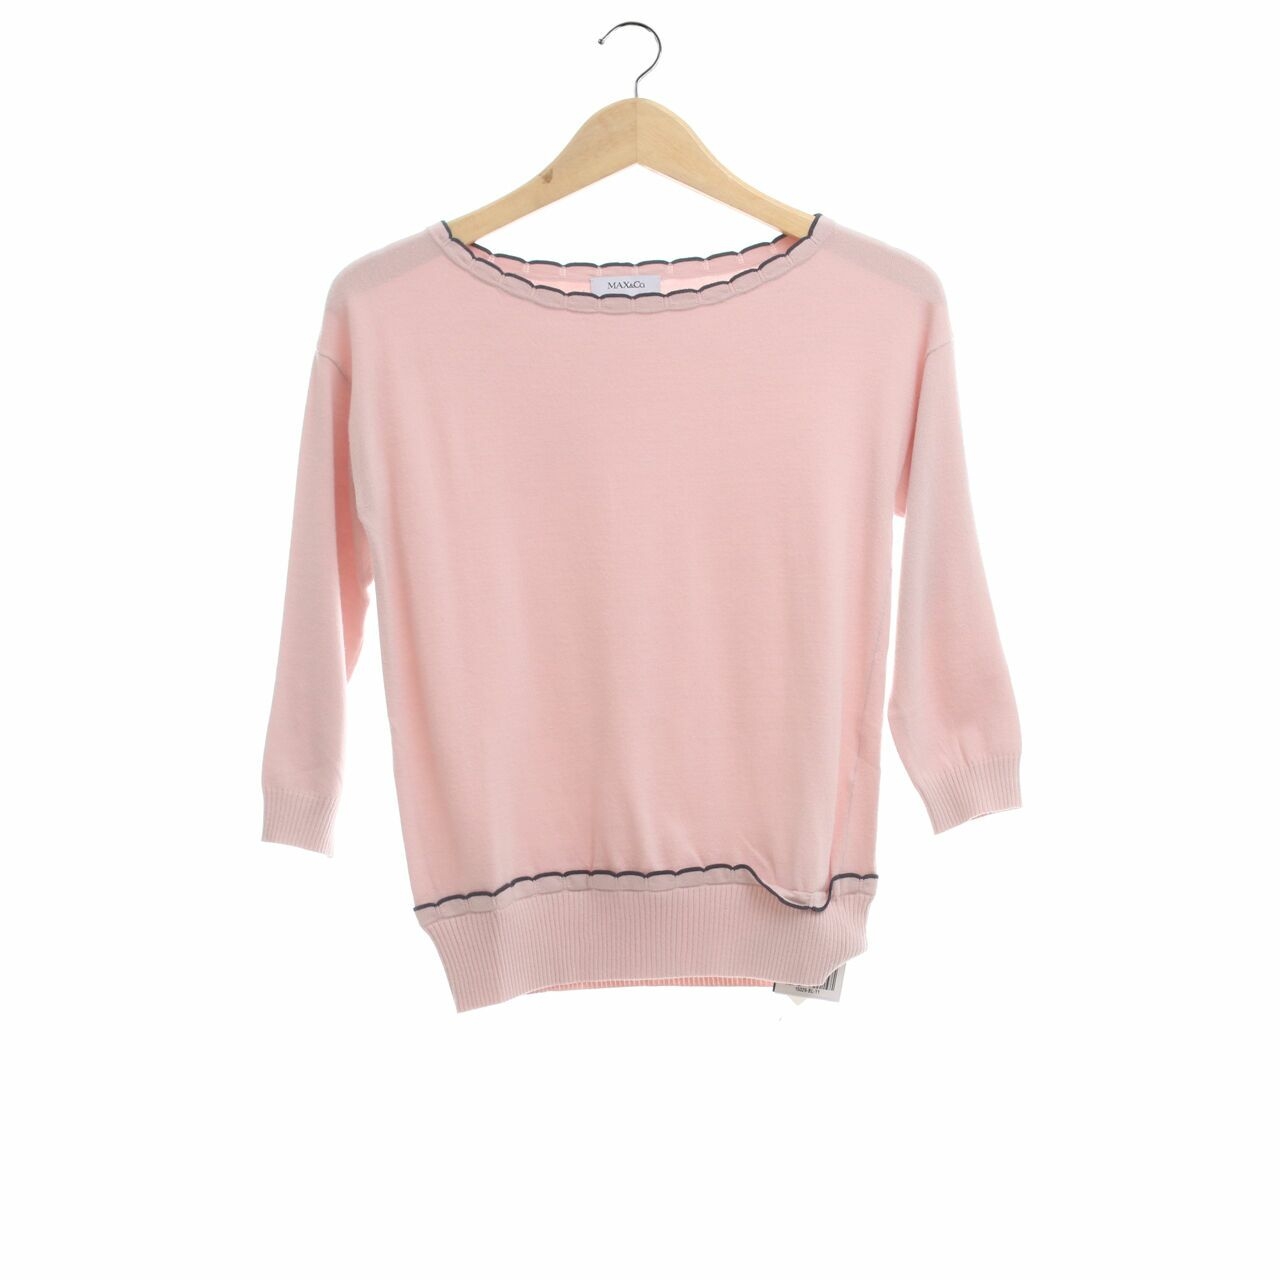 Max & Co. Pink Knit Blouse